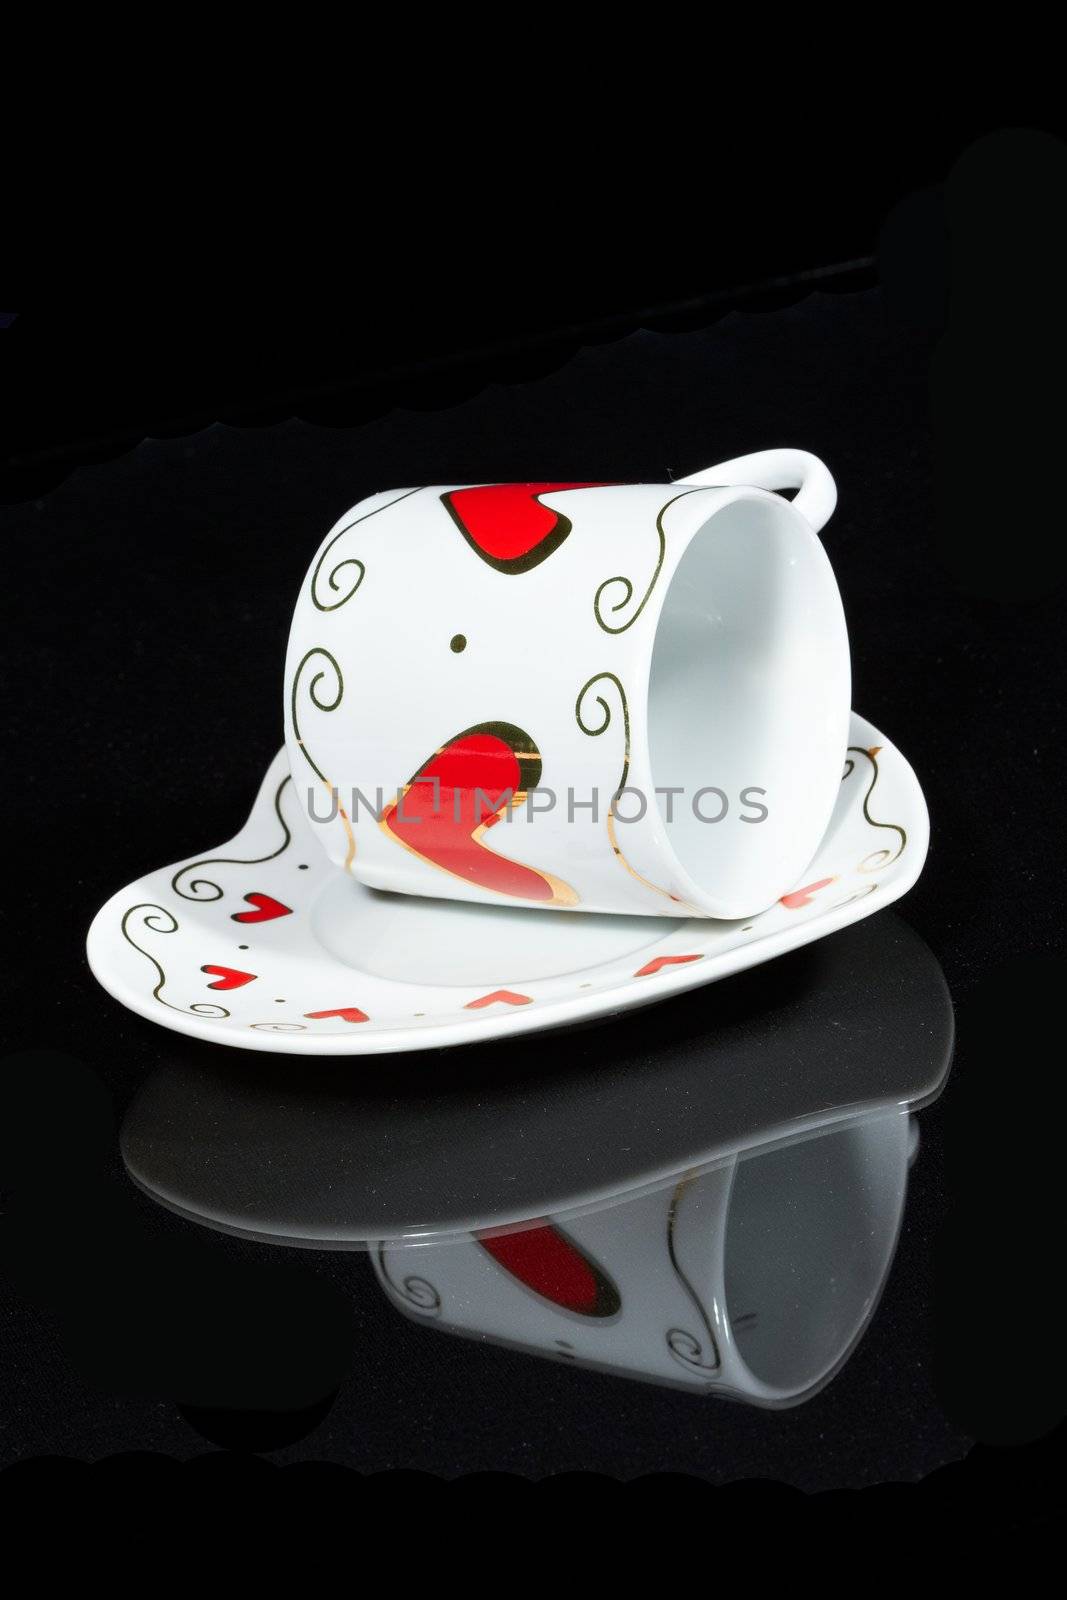 White cup with hearts is a black table, reflected in it.